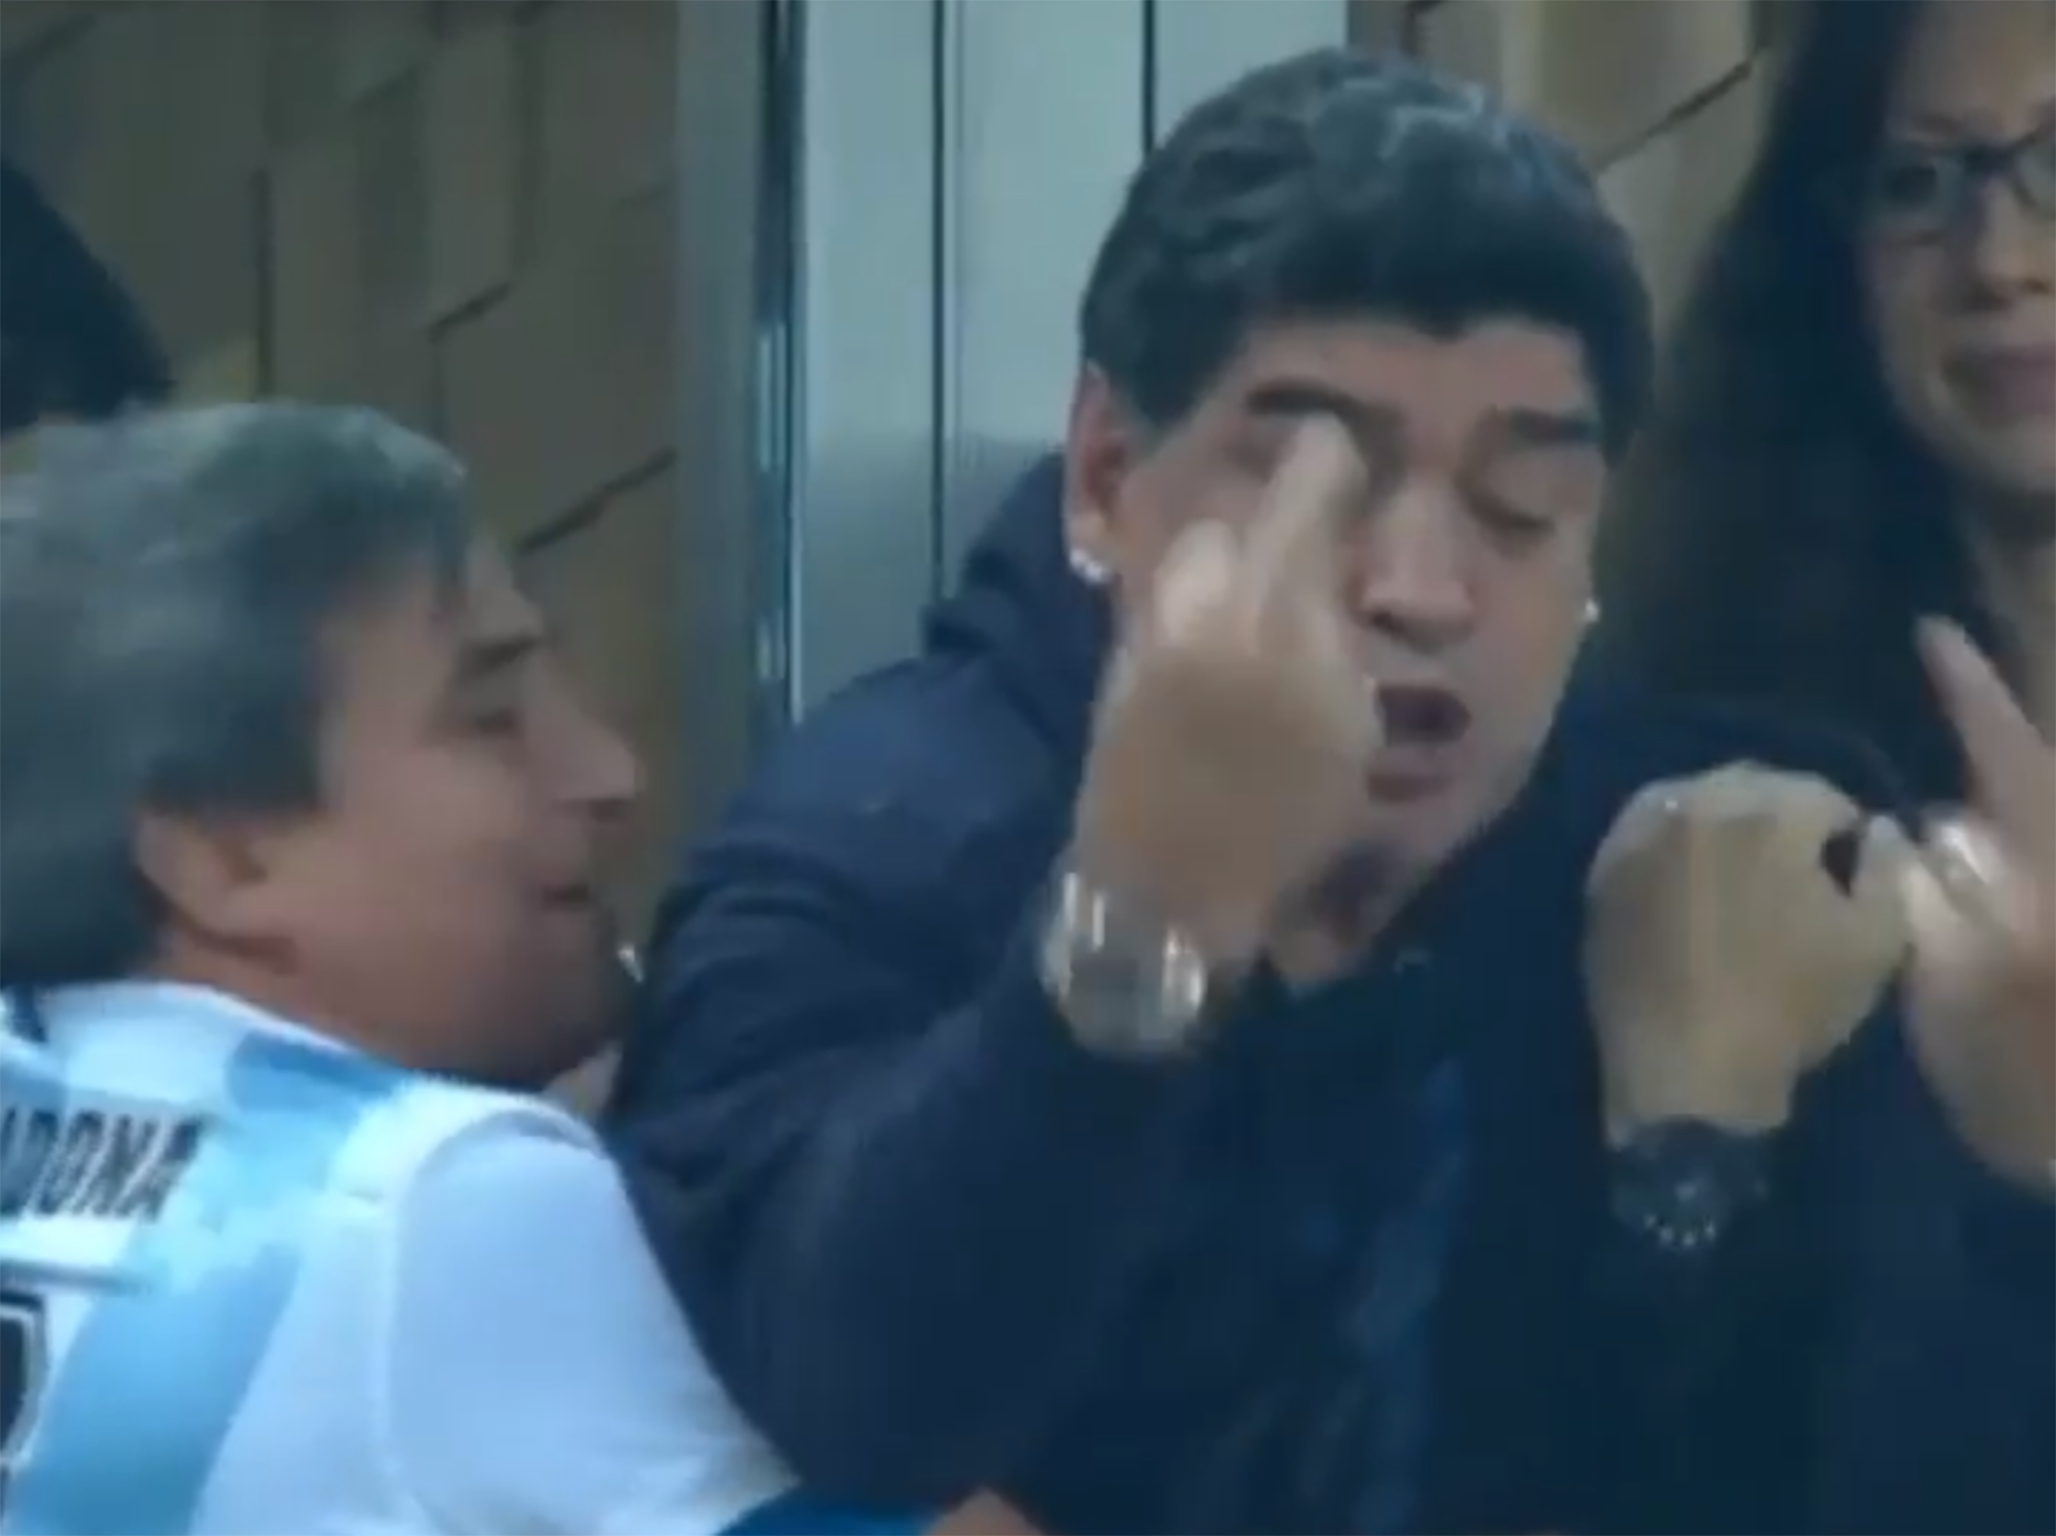 World Cup 2018: Gary Lineker brands Diego Maradona a 'laughing stock' after middle finger celebration